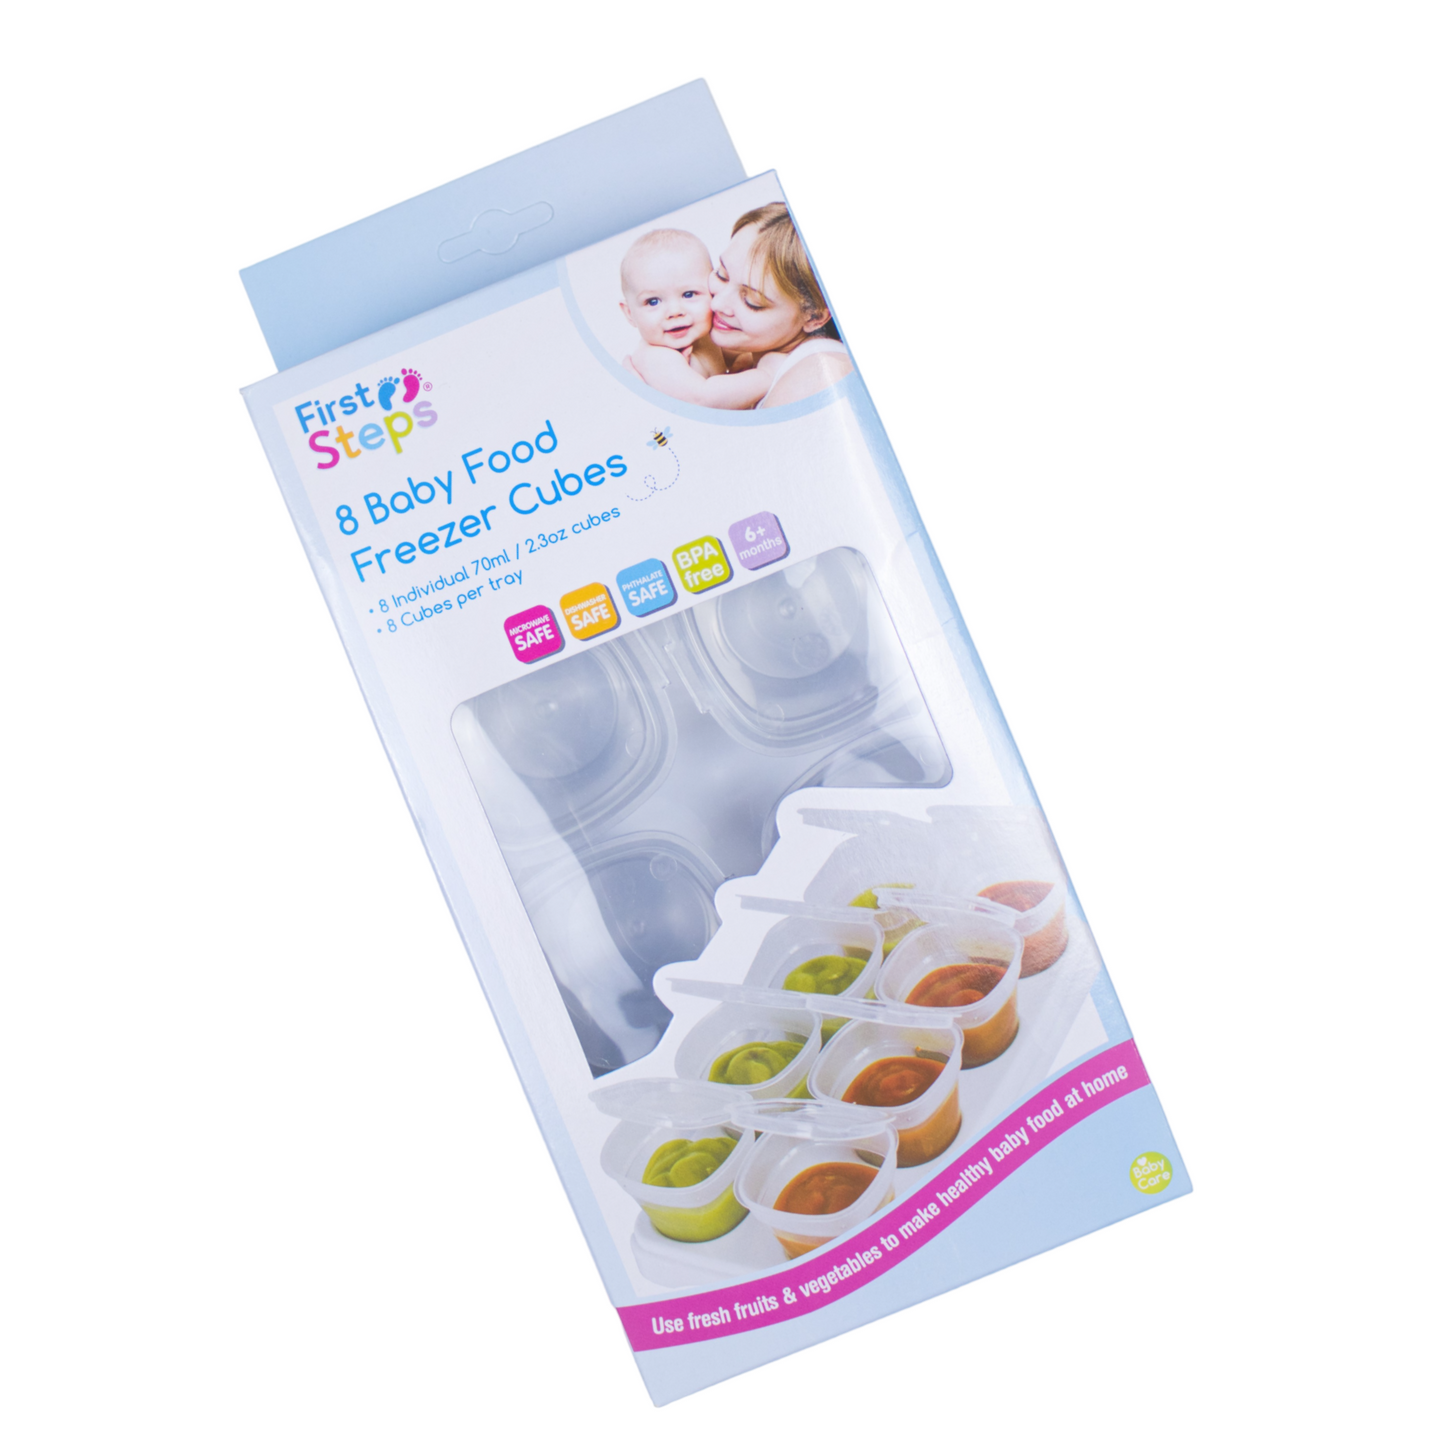 Set of eight convenient baby food pots, perfectly portioned and freezer-friendly for homemade meals anytime. Dishwasher safe for east cleaning. 